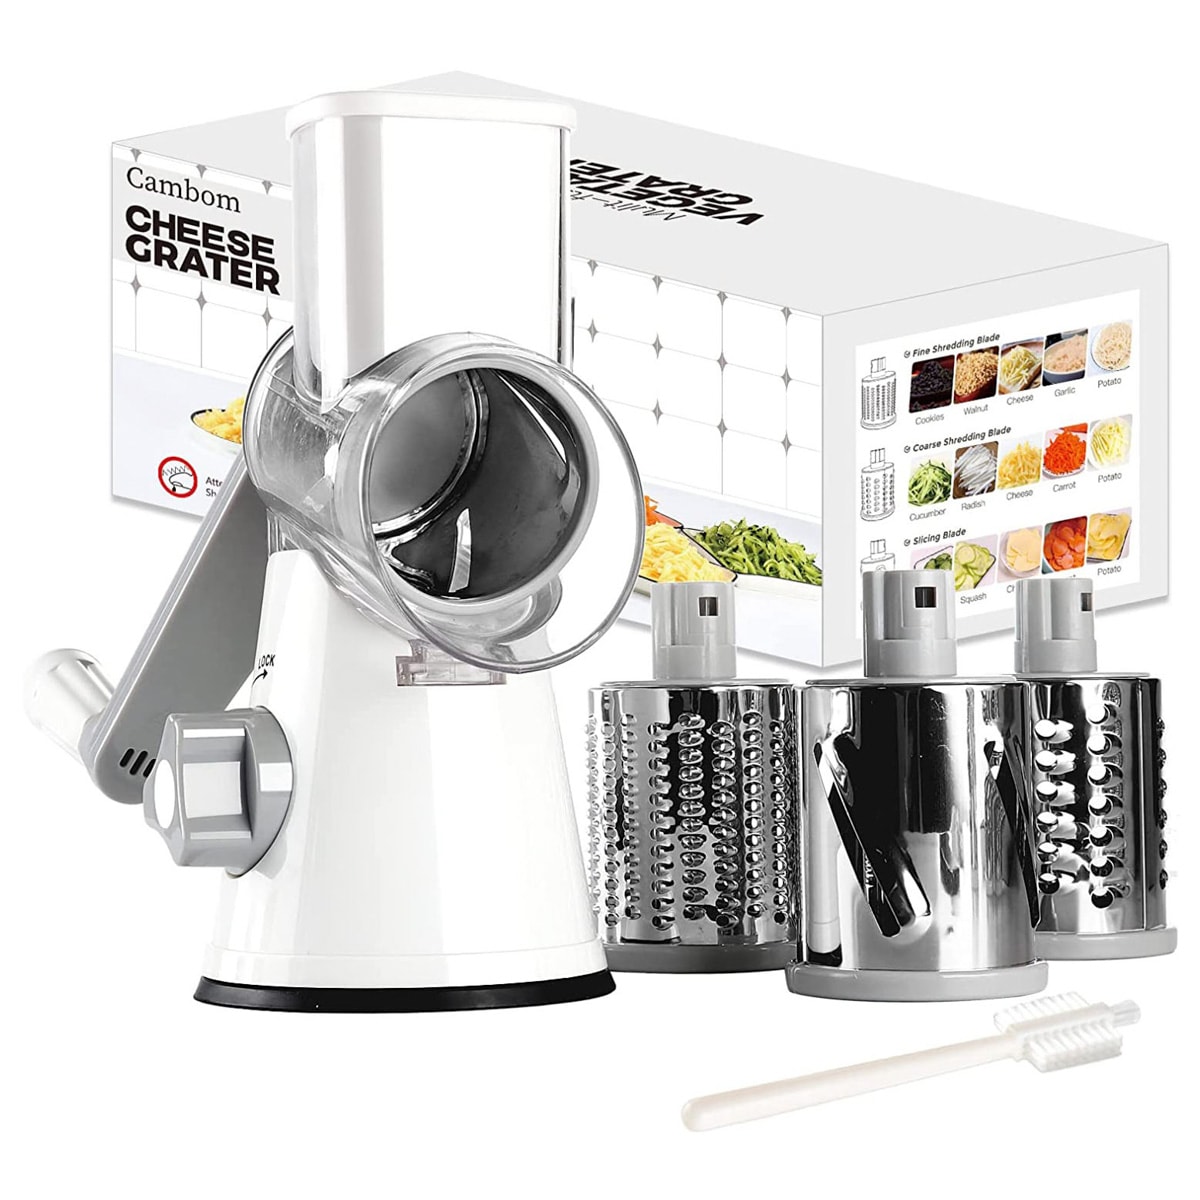 Rotary cheese grater and shredder with all of the attachments.